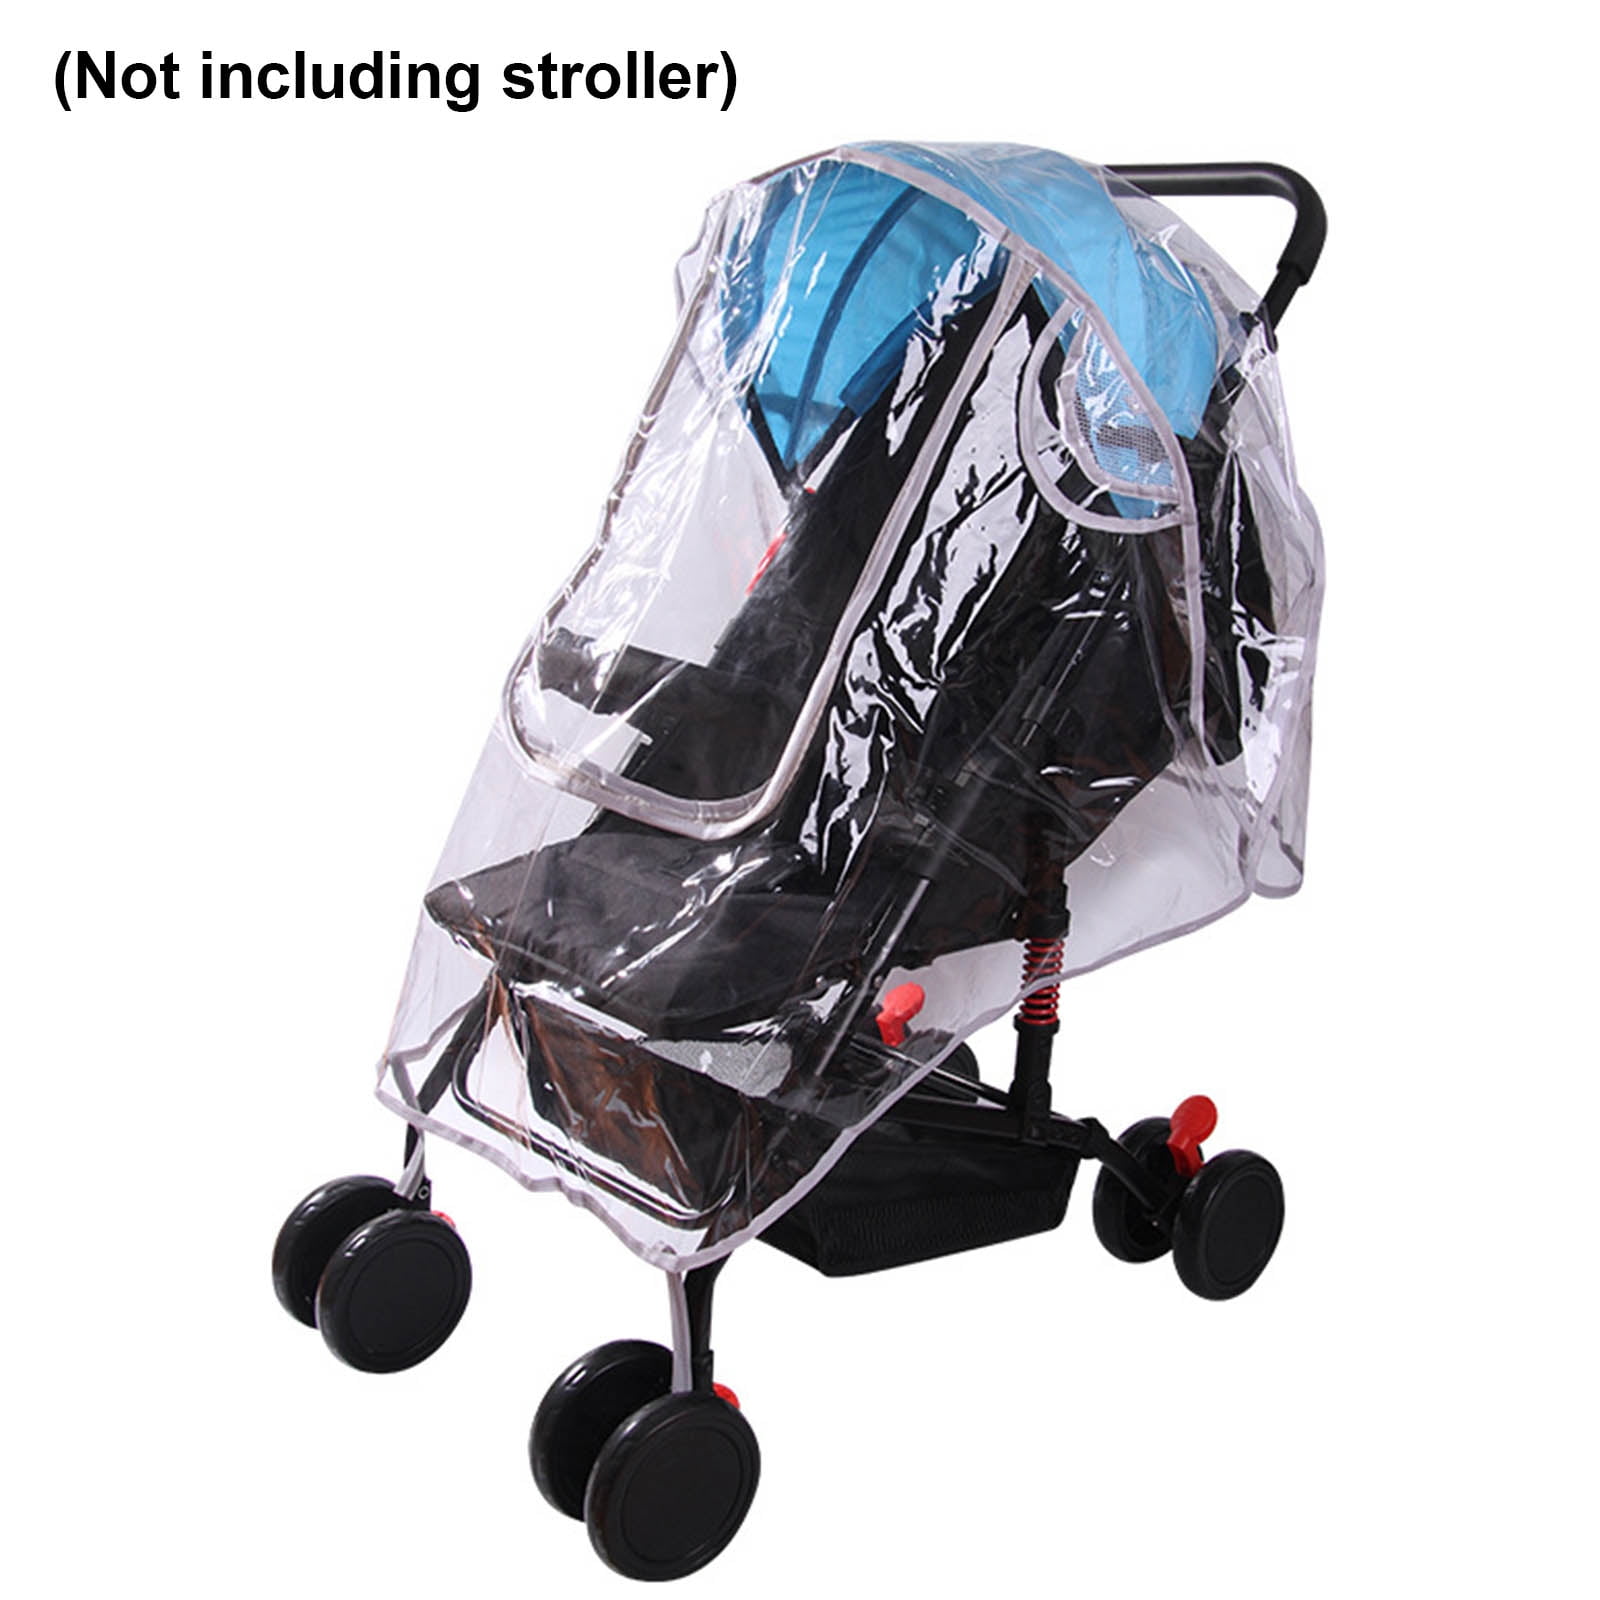 Graco Universal Baby Stroller Plastic Rain Cover & Weather Shield,  Lightweight Waterproof Weathershield, Clear Vinyl Infant Car Seat Carriage